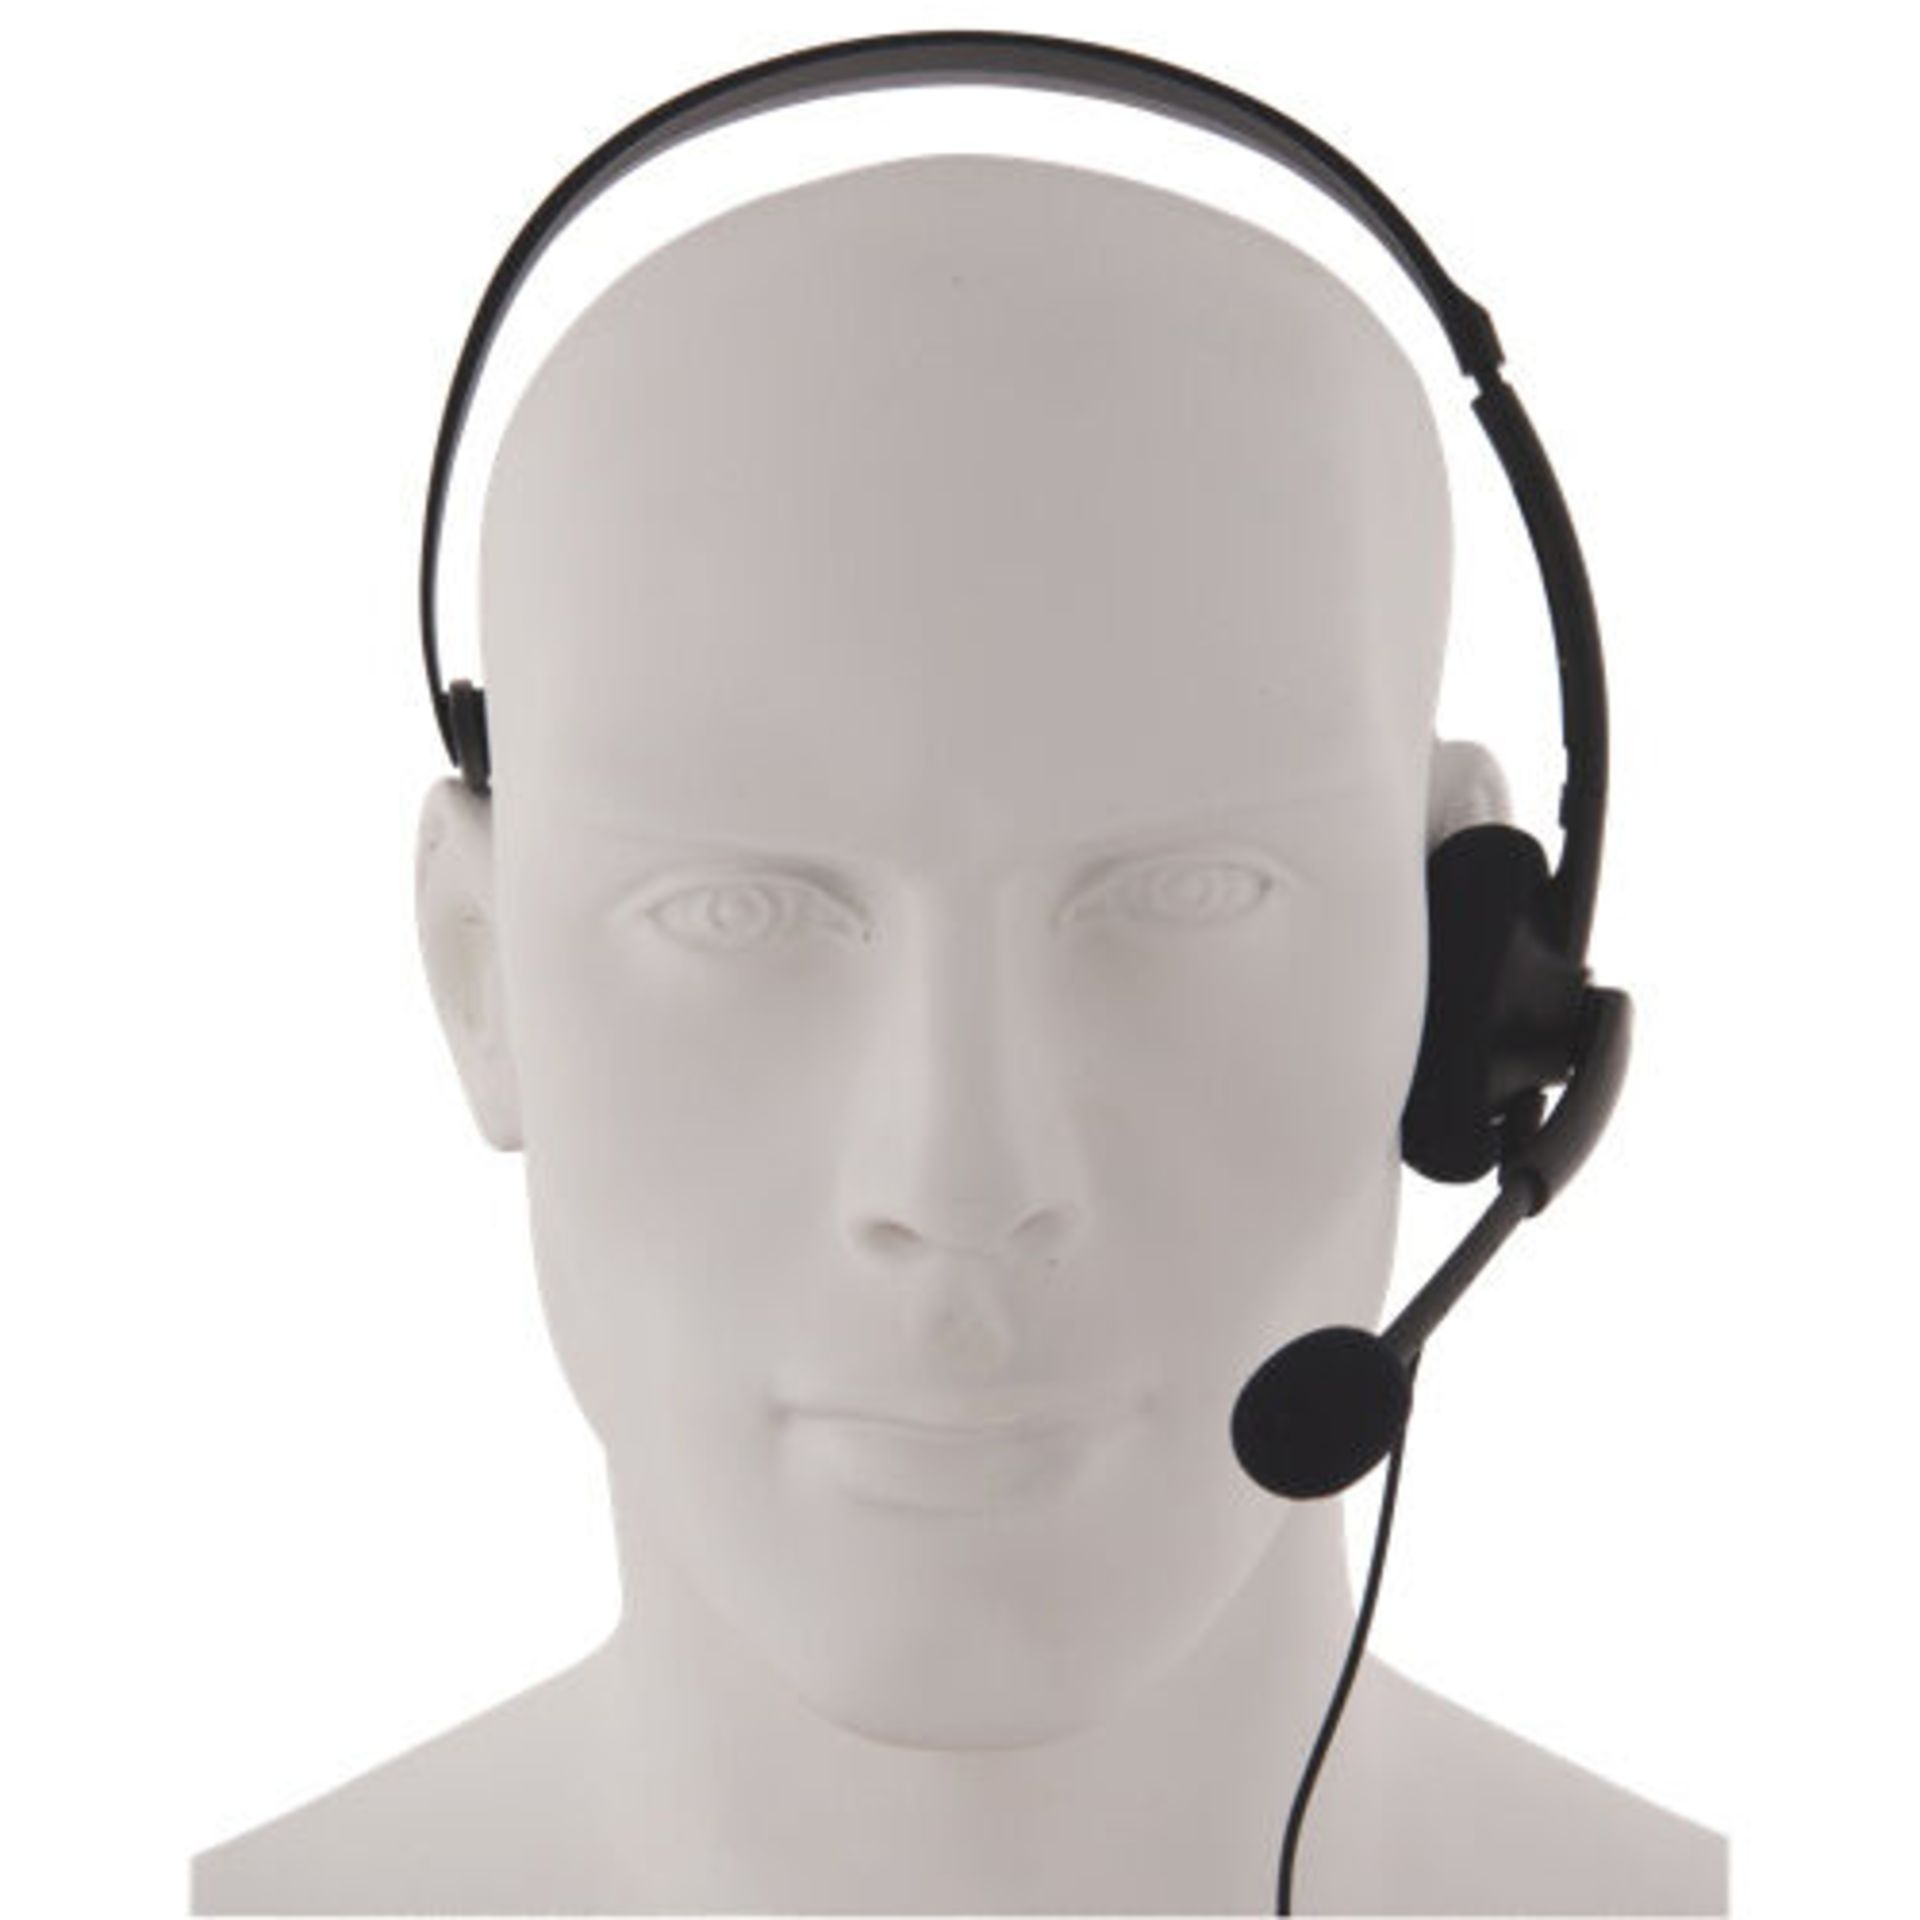 JOBLOT 100 X NEW OFFICIAL XBOX 360 LIVE ONLINE CHAT HEADSET WITH MIC GAMING HEADPHONES 2.5MM AUX - Image 2 of 6